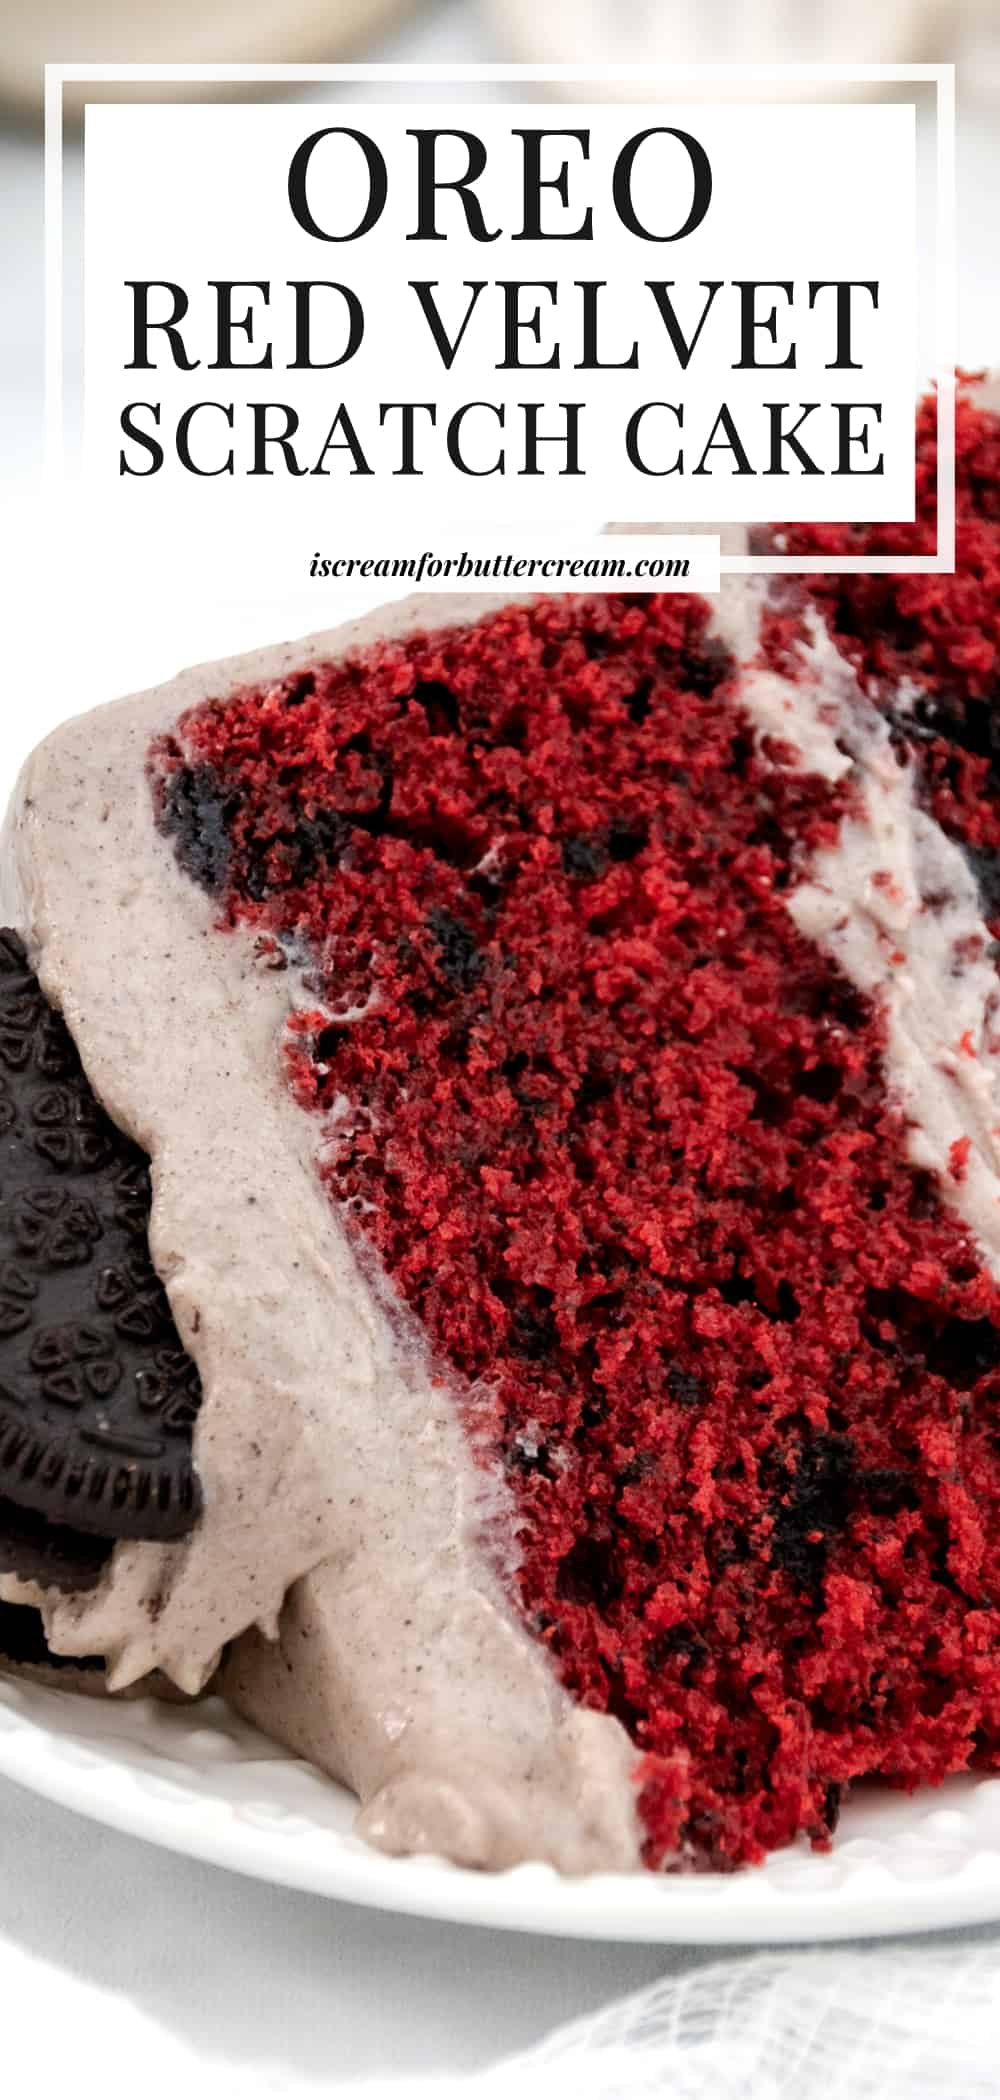 Pinterest image with close up shot of cookies and cream red velvet cake on a plate with text overlay.